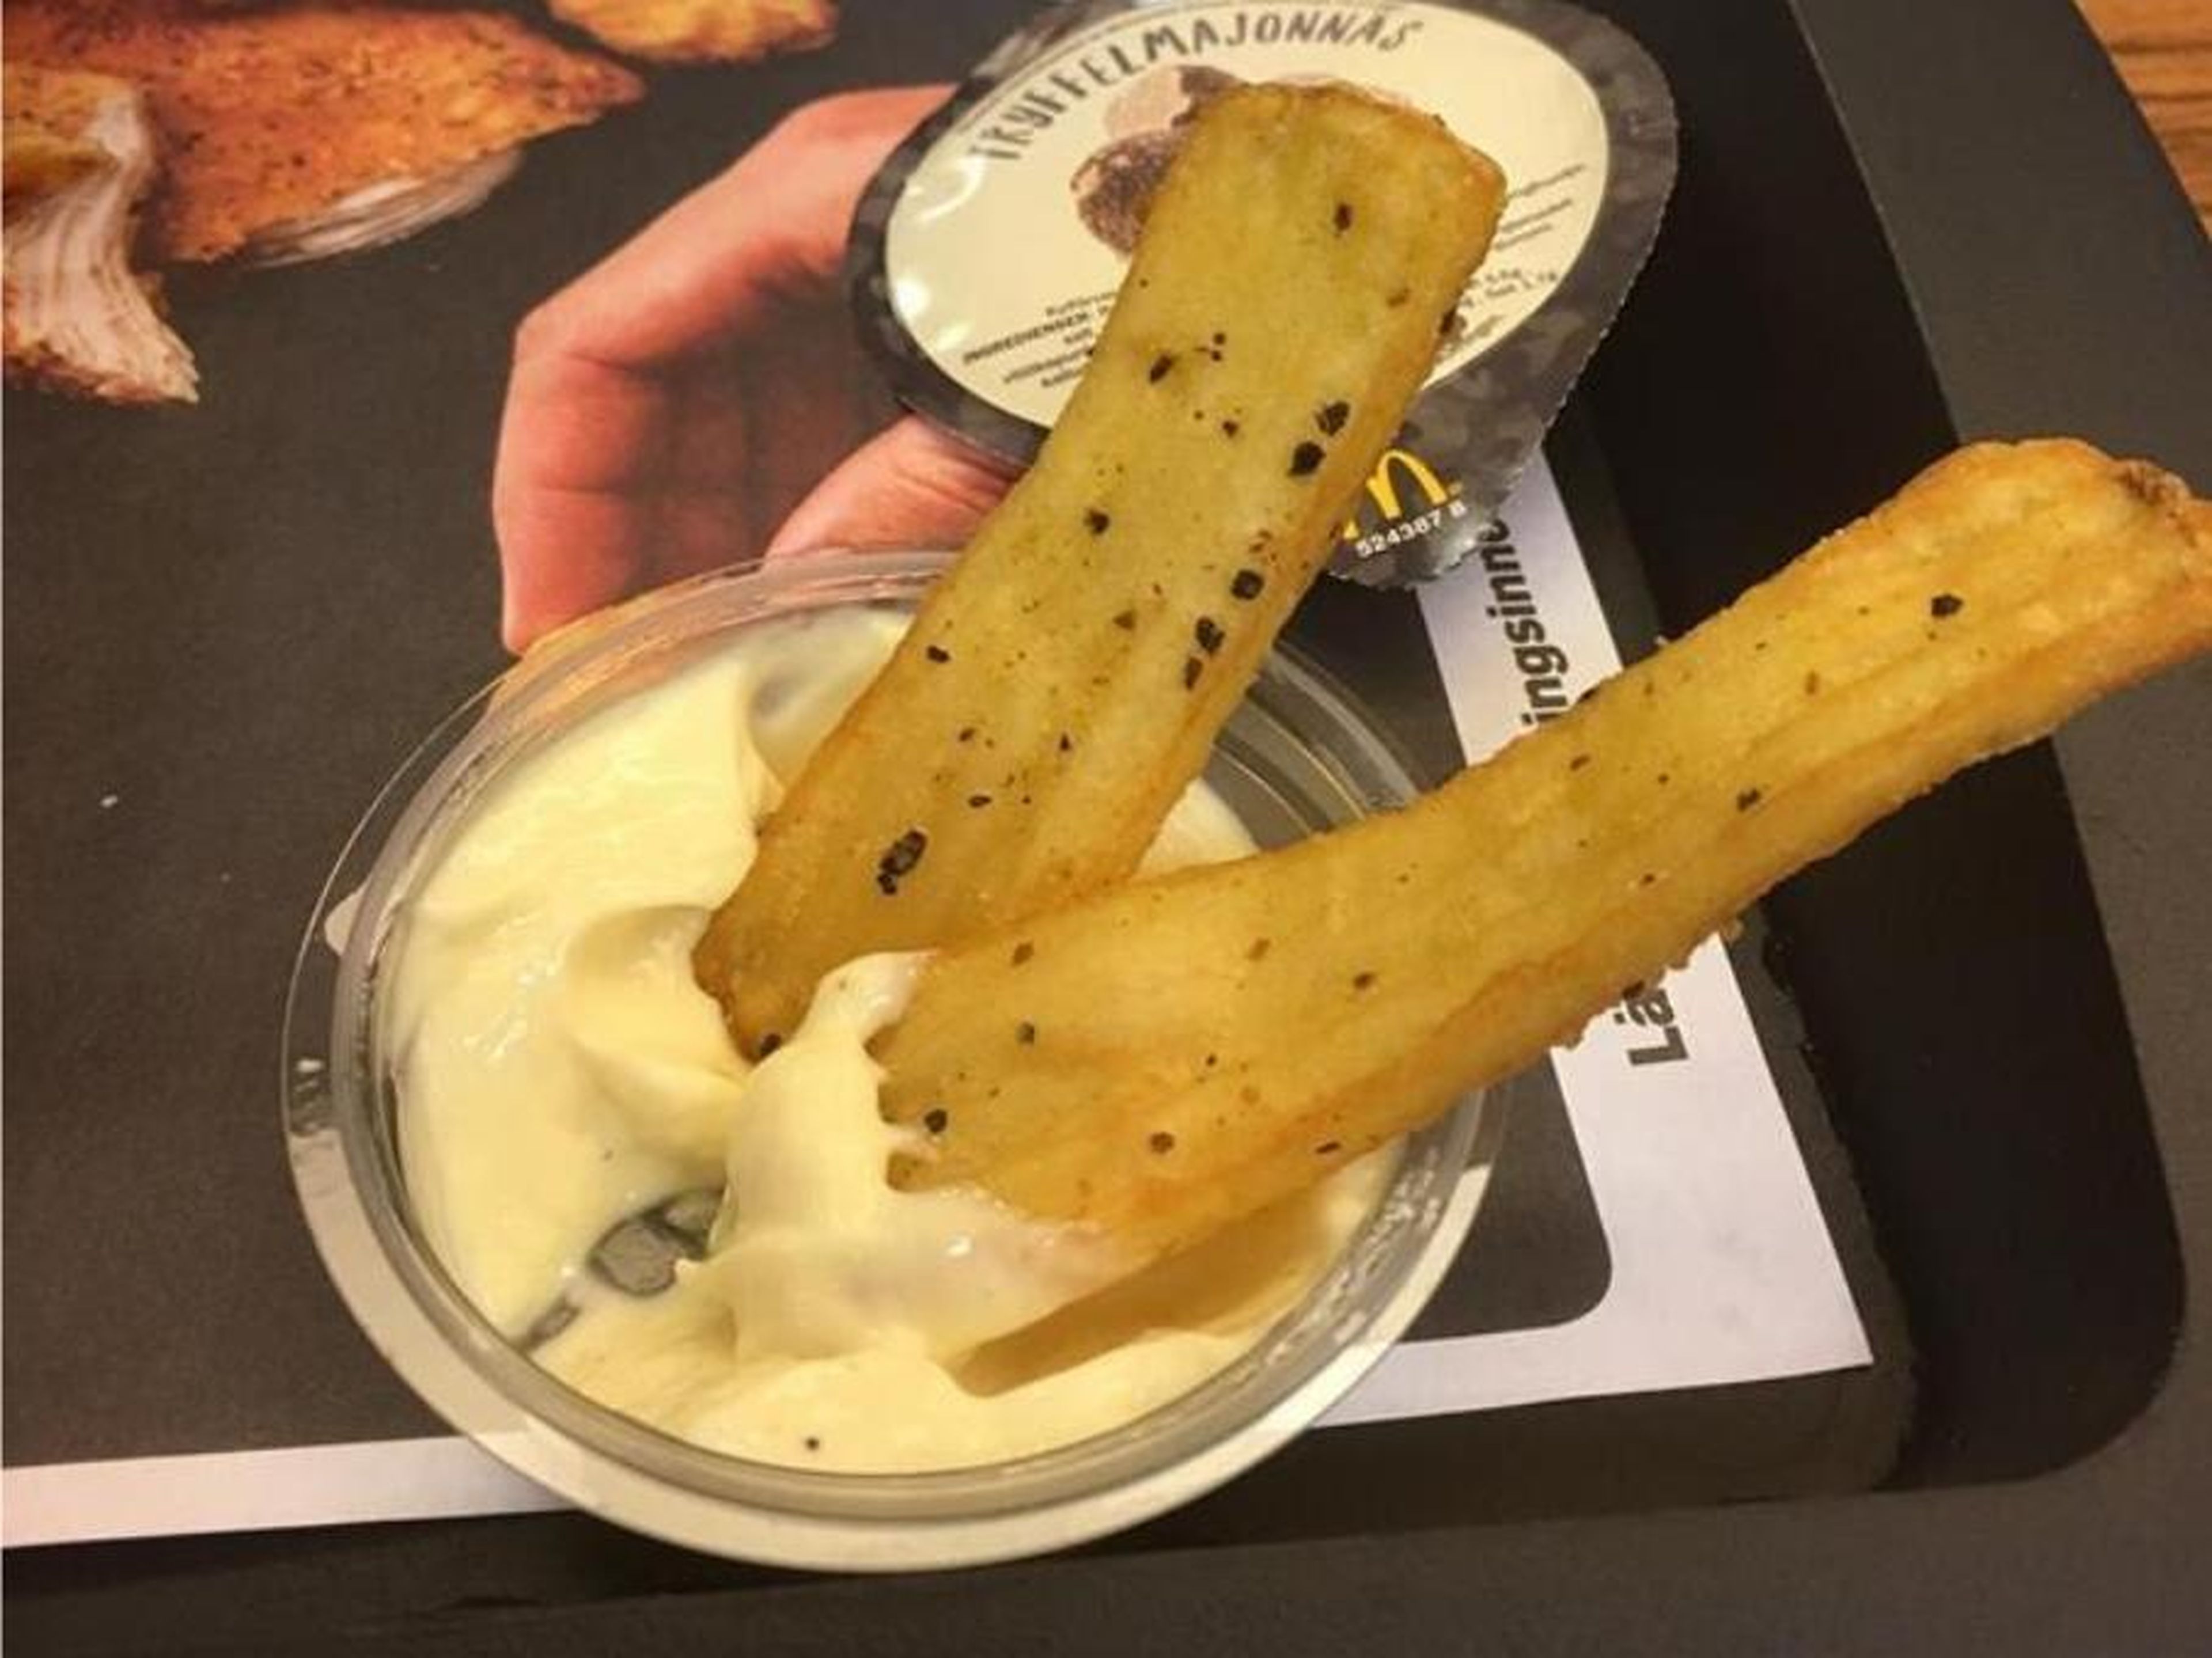 It also came with flat fries and limited-edition truffle mayo.